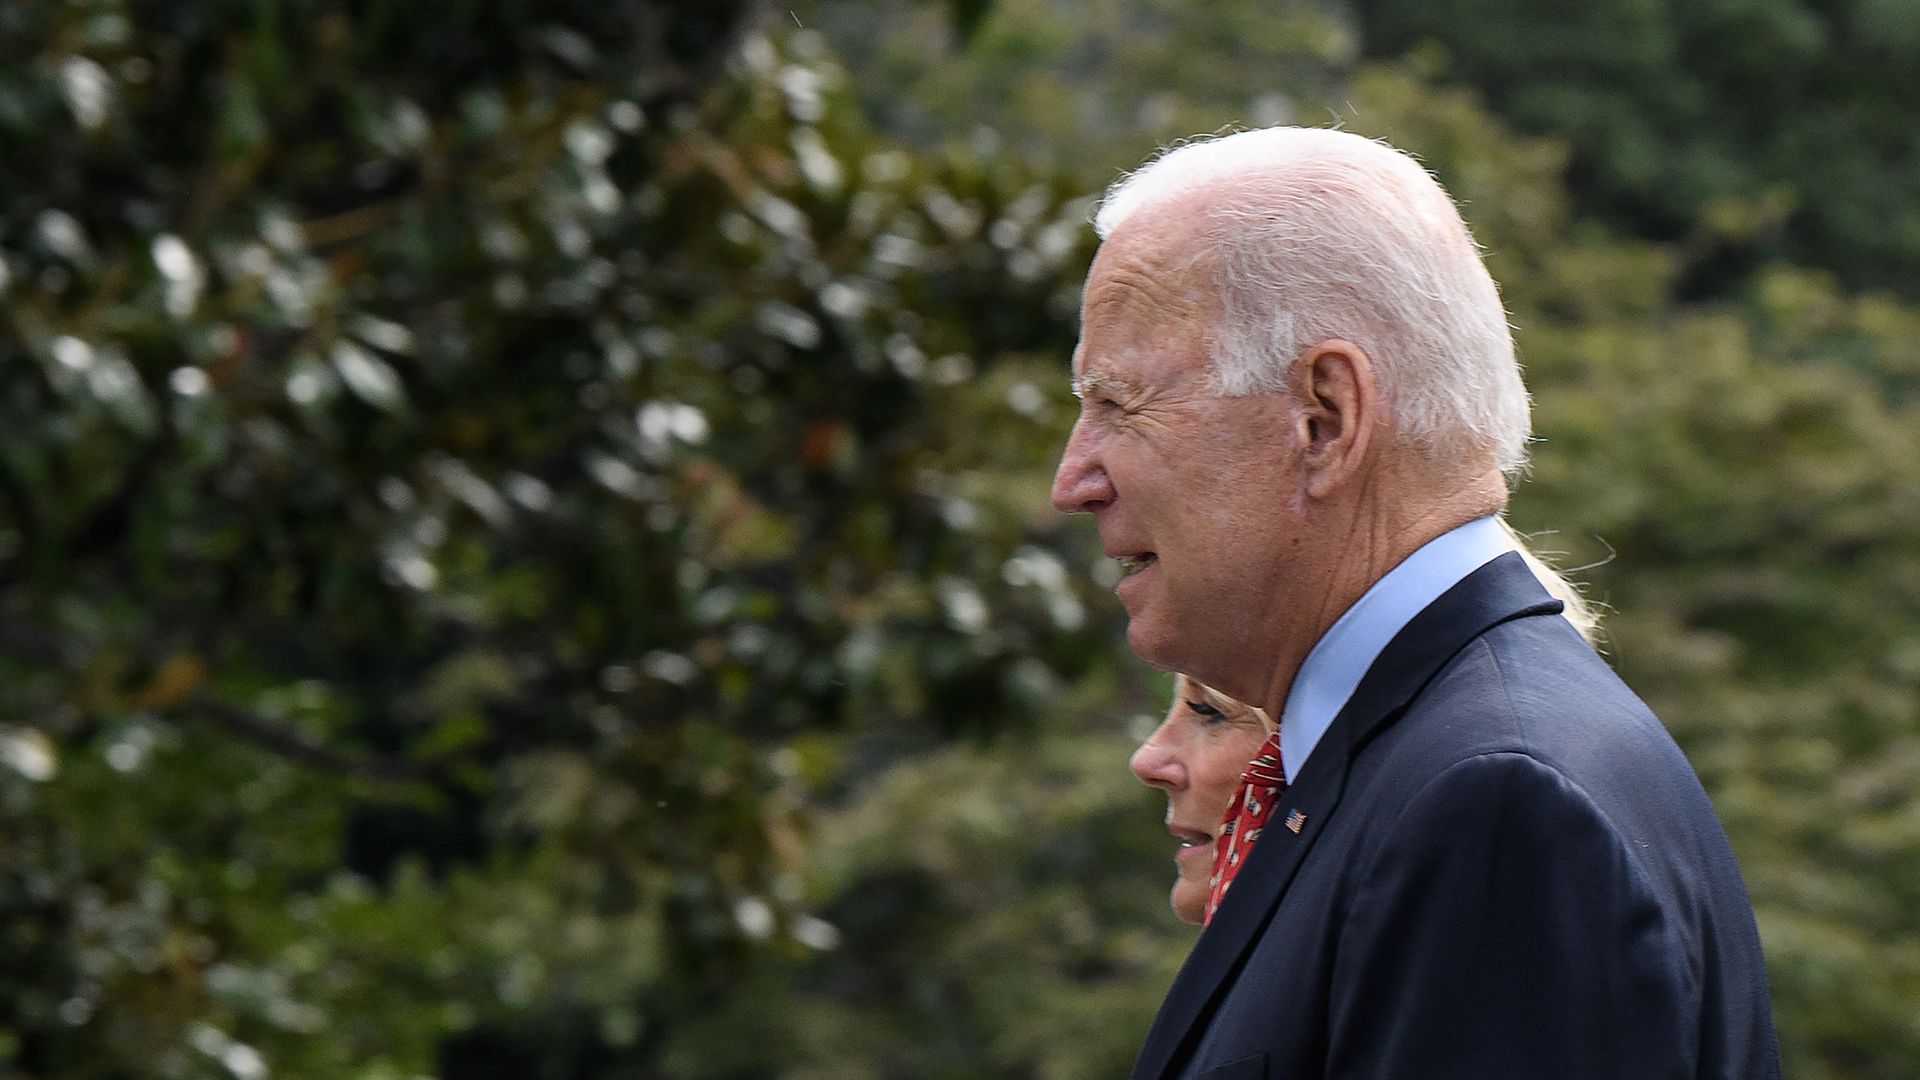 President Joe Biden and First Lady Jill Biden arrive at the White House in Washington, DC, on October 4, 2021